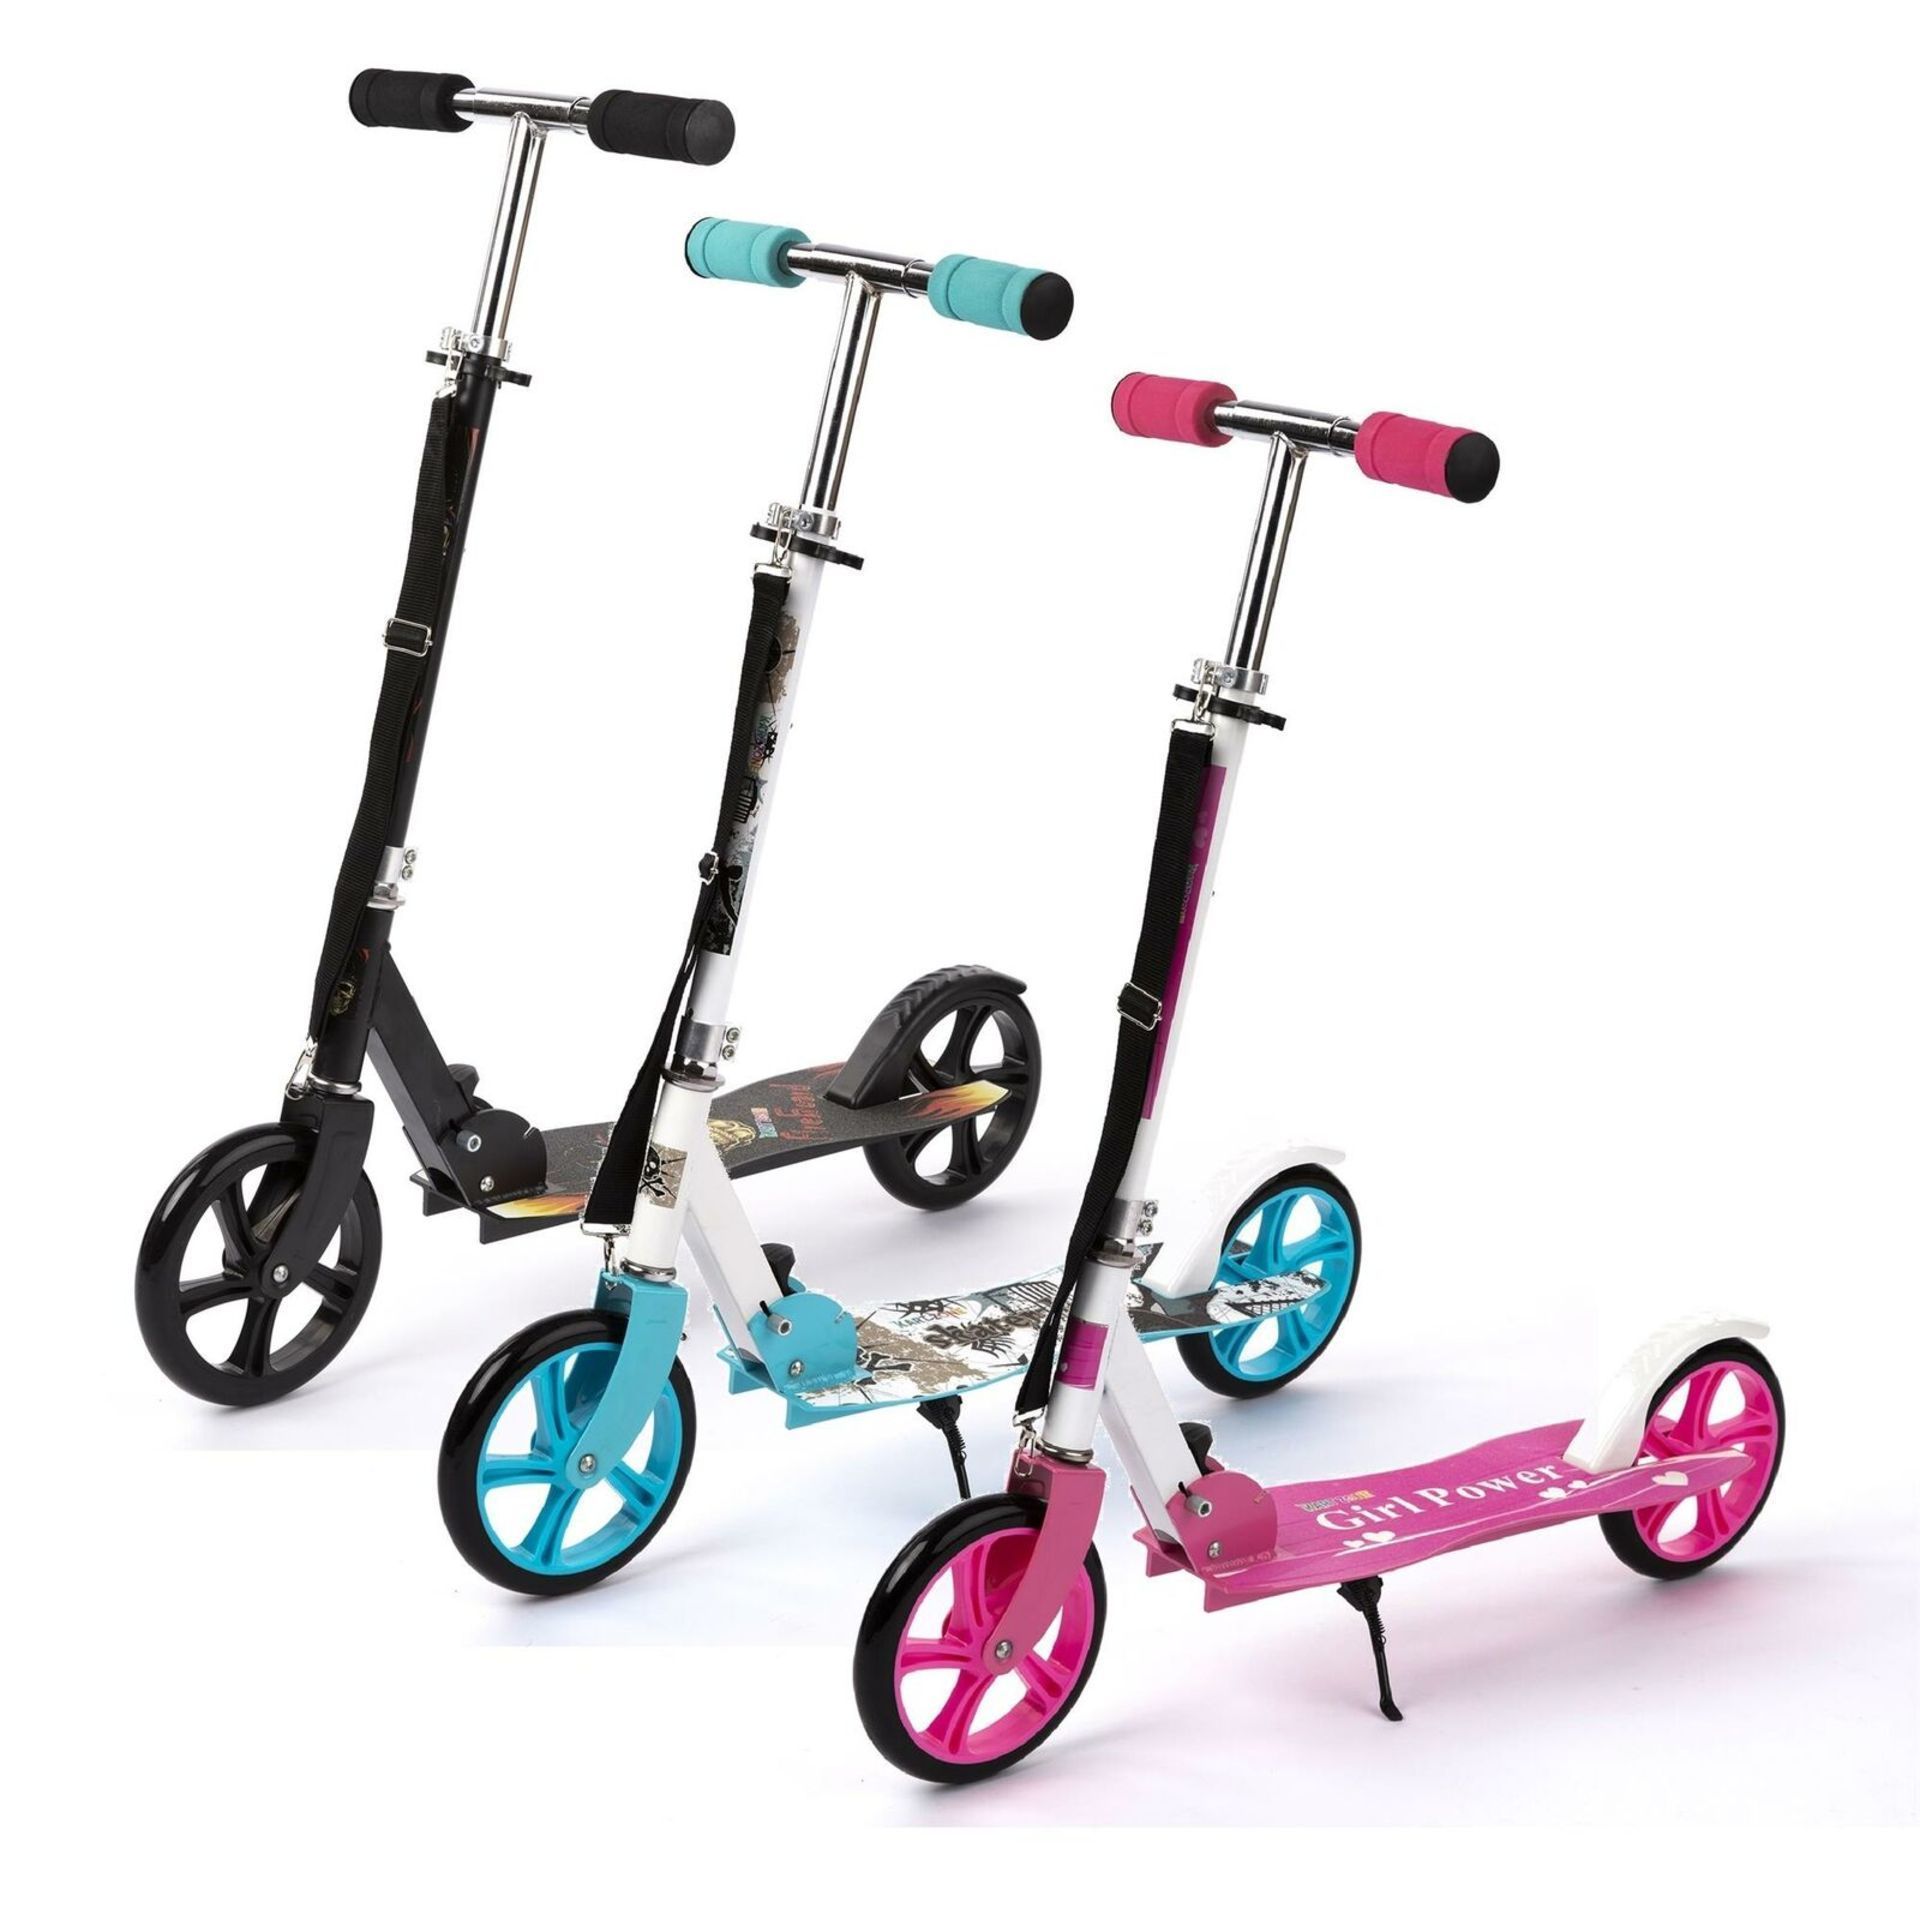 2 X BRAND NEW BOXED KART ZONE LIGHTWEIGHT ALUMINIUM SCOOTERS. ONLY 3.8KG (349/30)